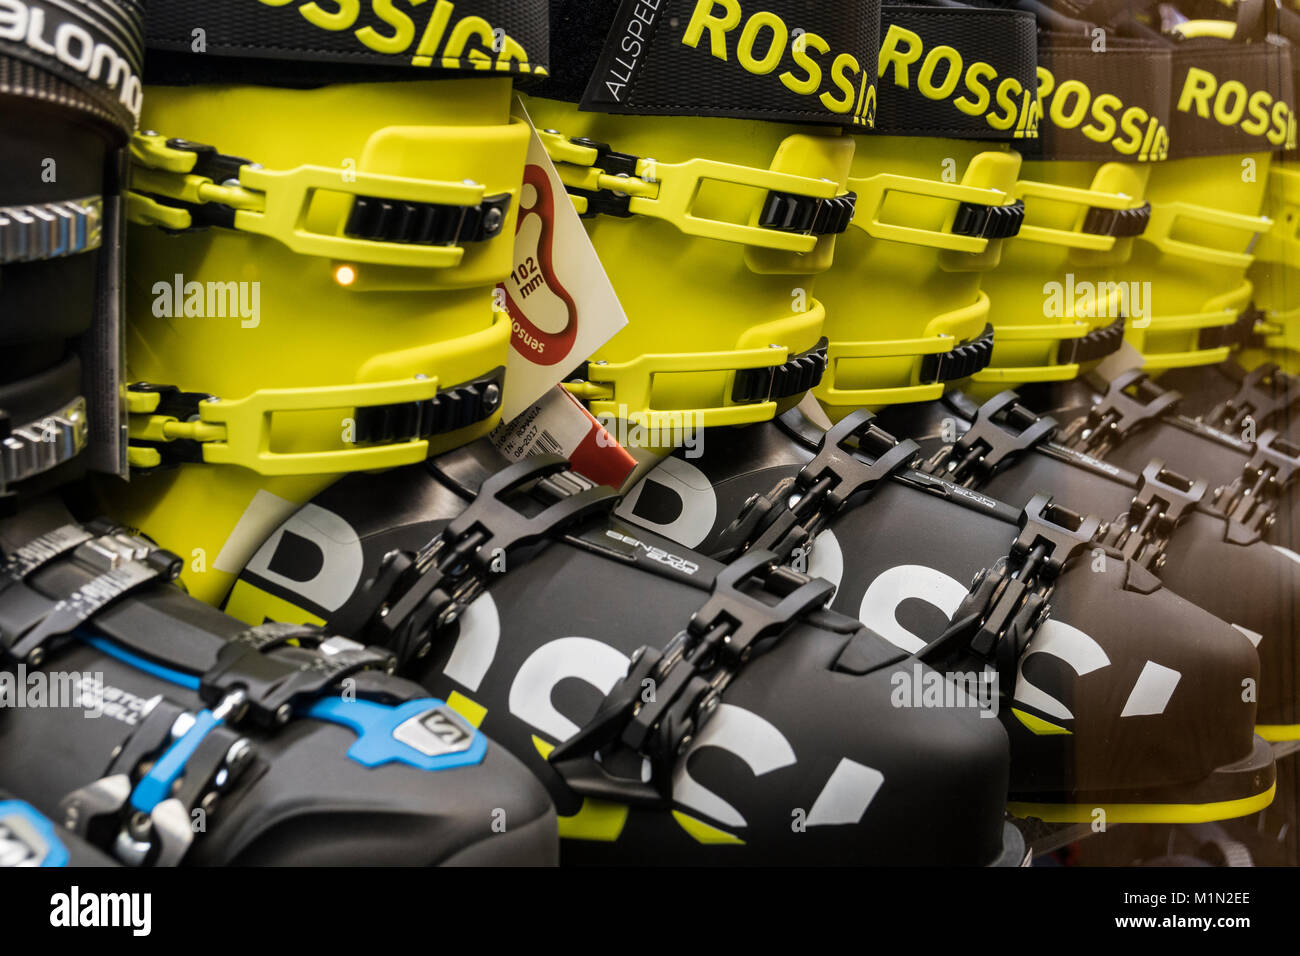 A row of brand new yellow and black Rossignol ski boots in a shop window in the commercial centre of the French ski resort of Les Menuires Stock Photo